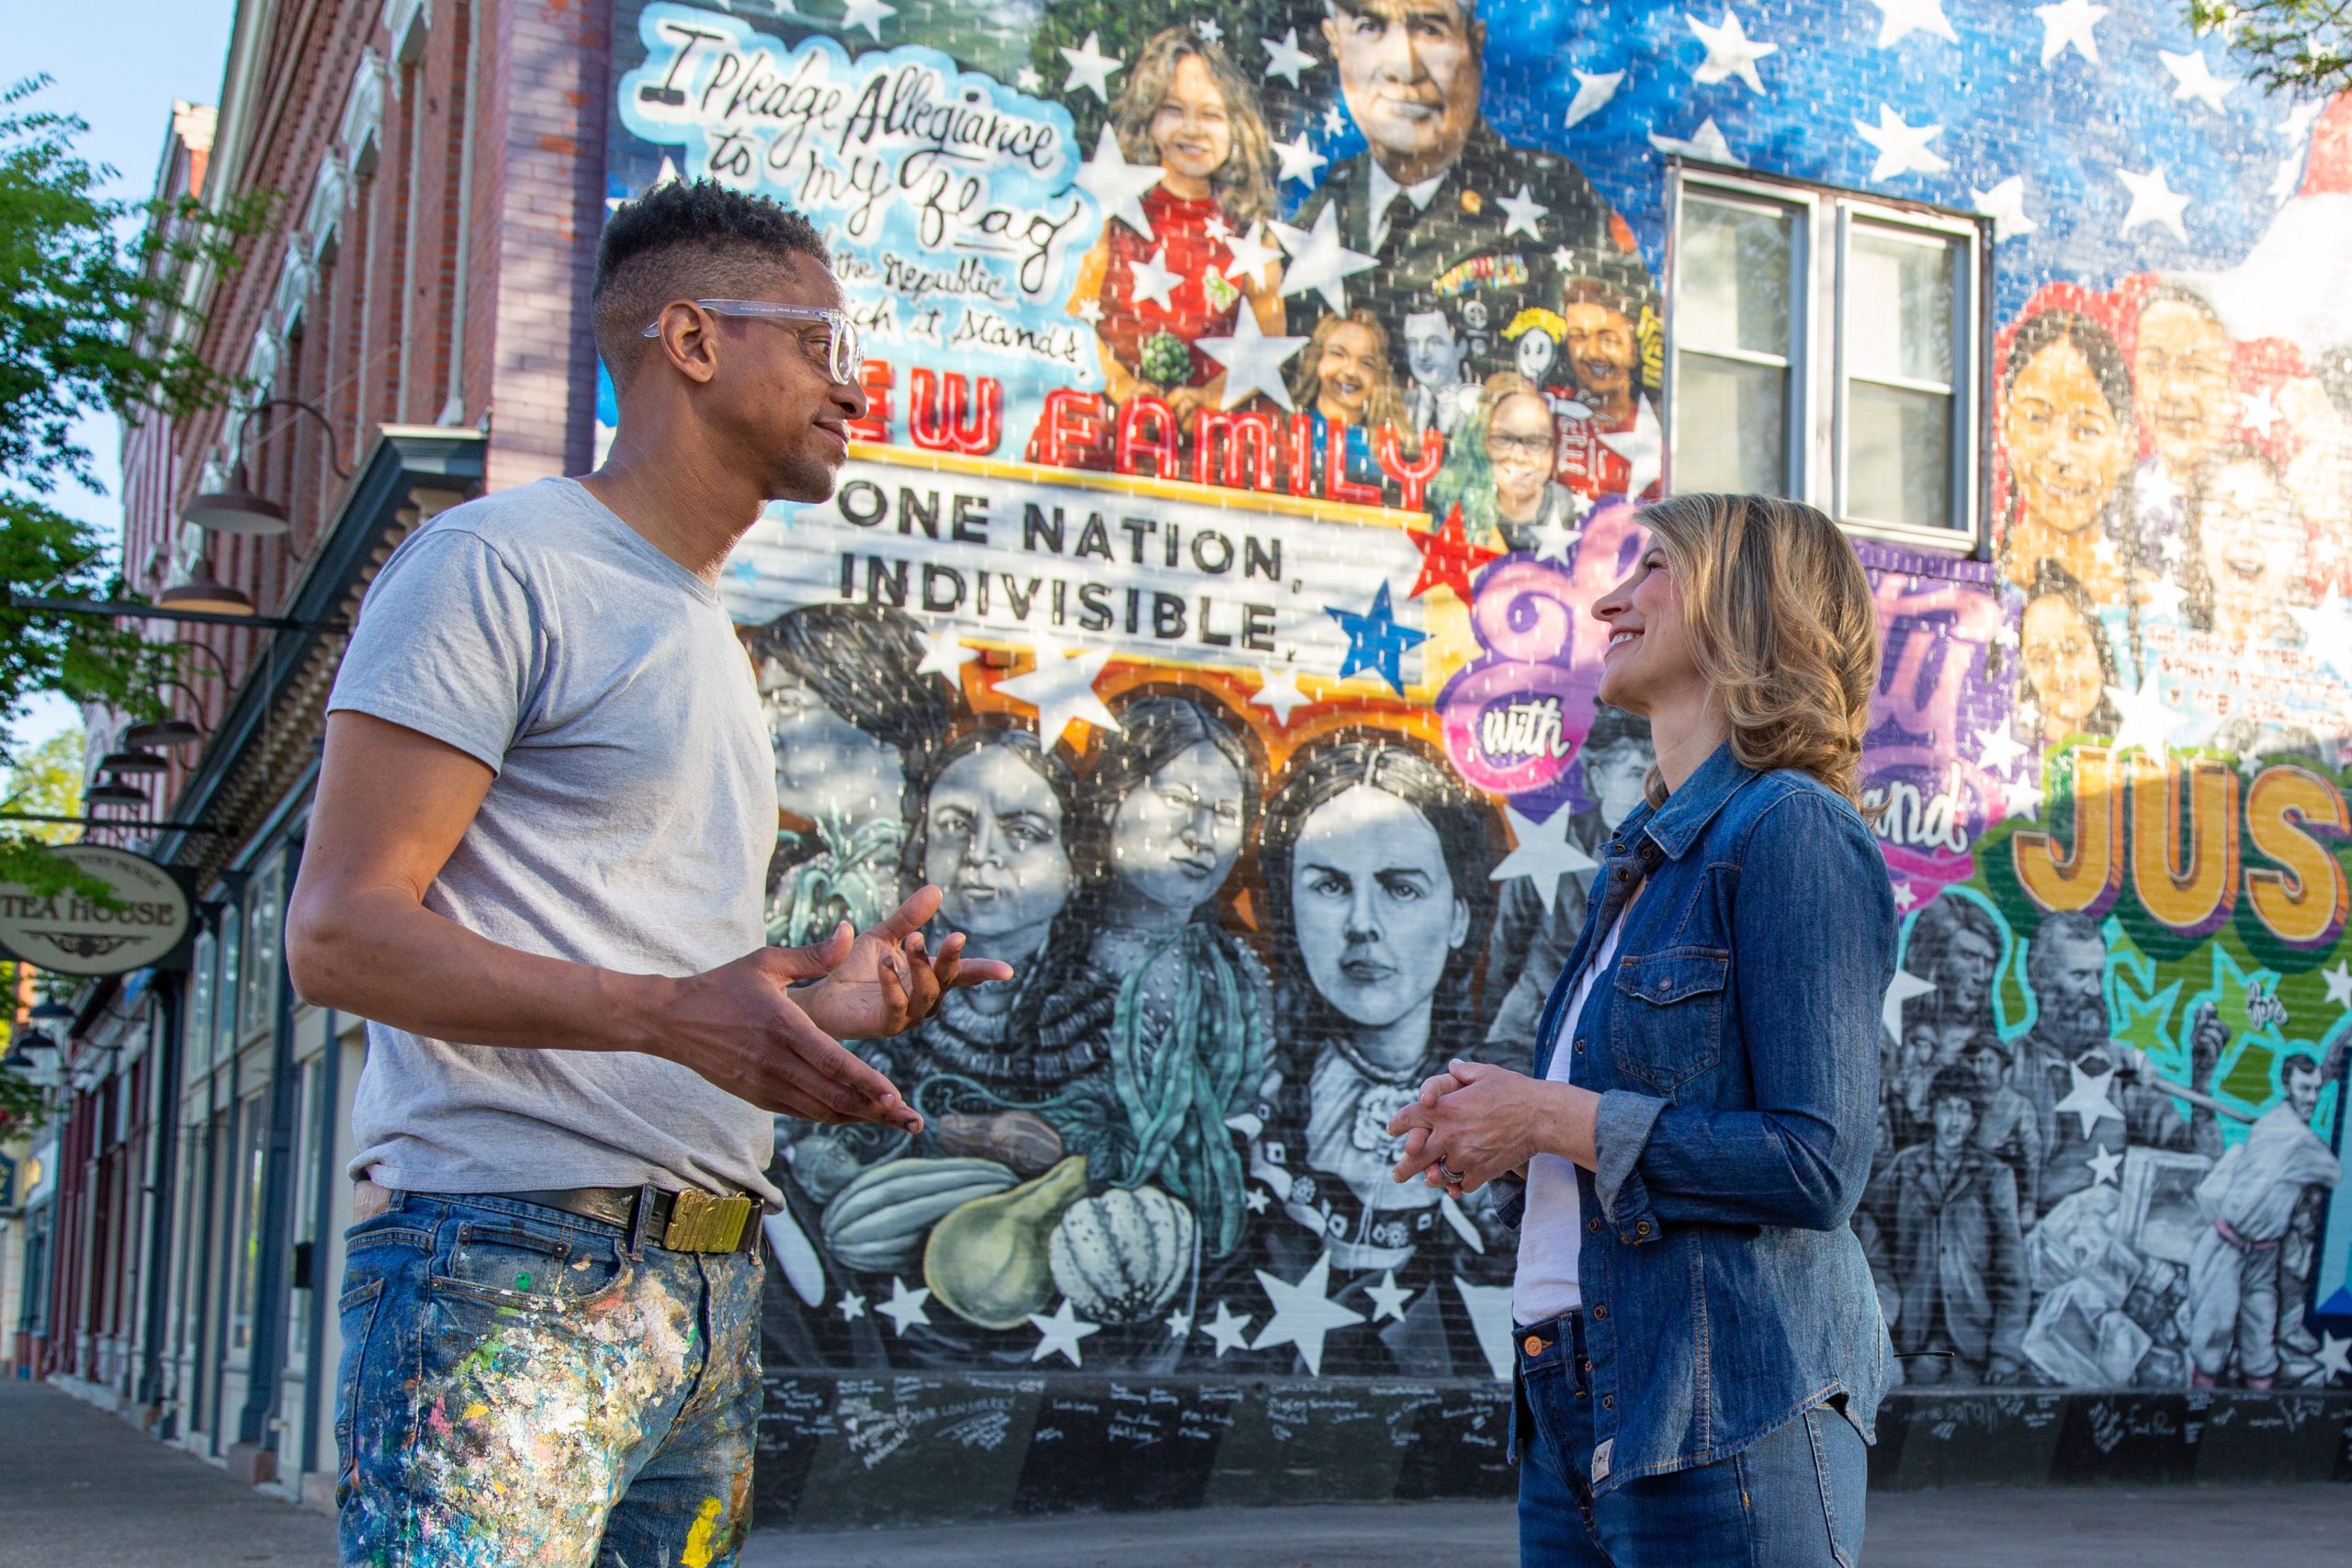 Samantha meets Shawn Dunwoody an sees his mural in Genesee River Valley New York